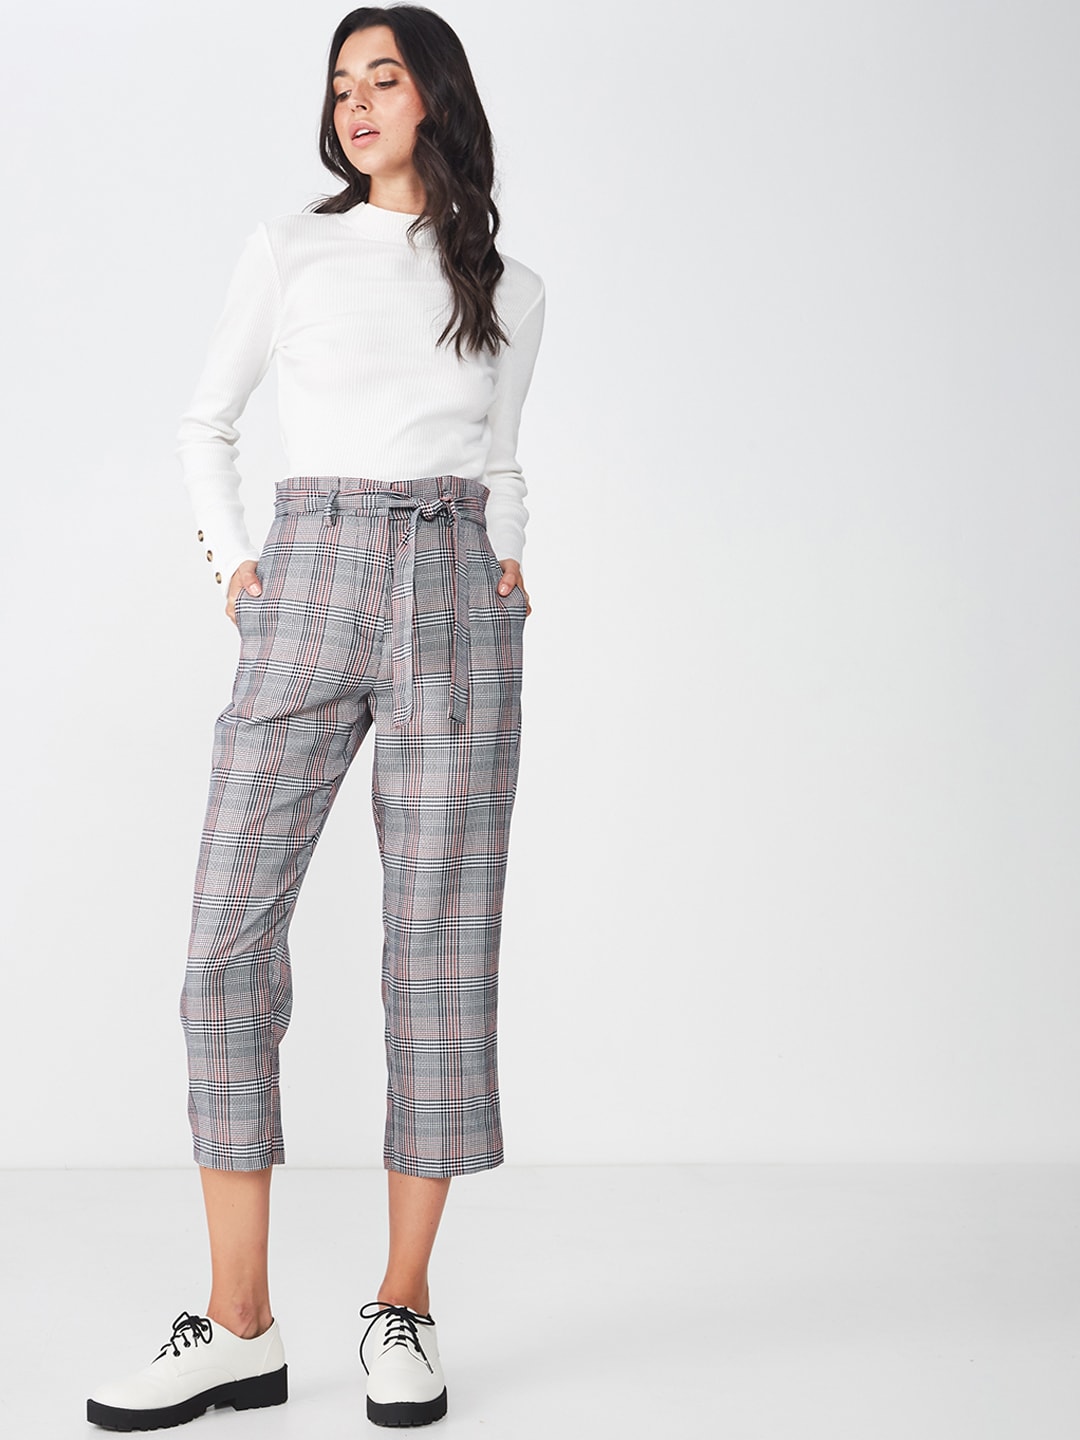 COTTON ON Women Black & Grey Slim Fit Checked Regular Trousers Price in India